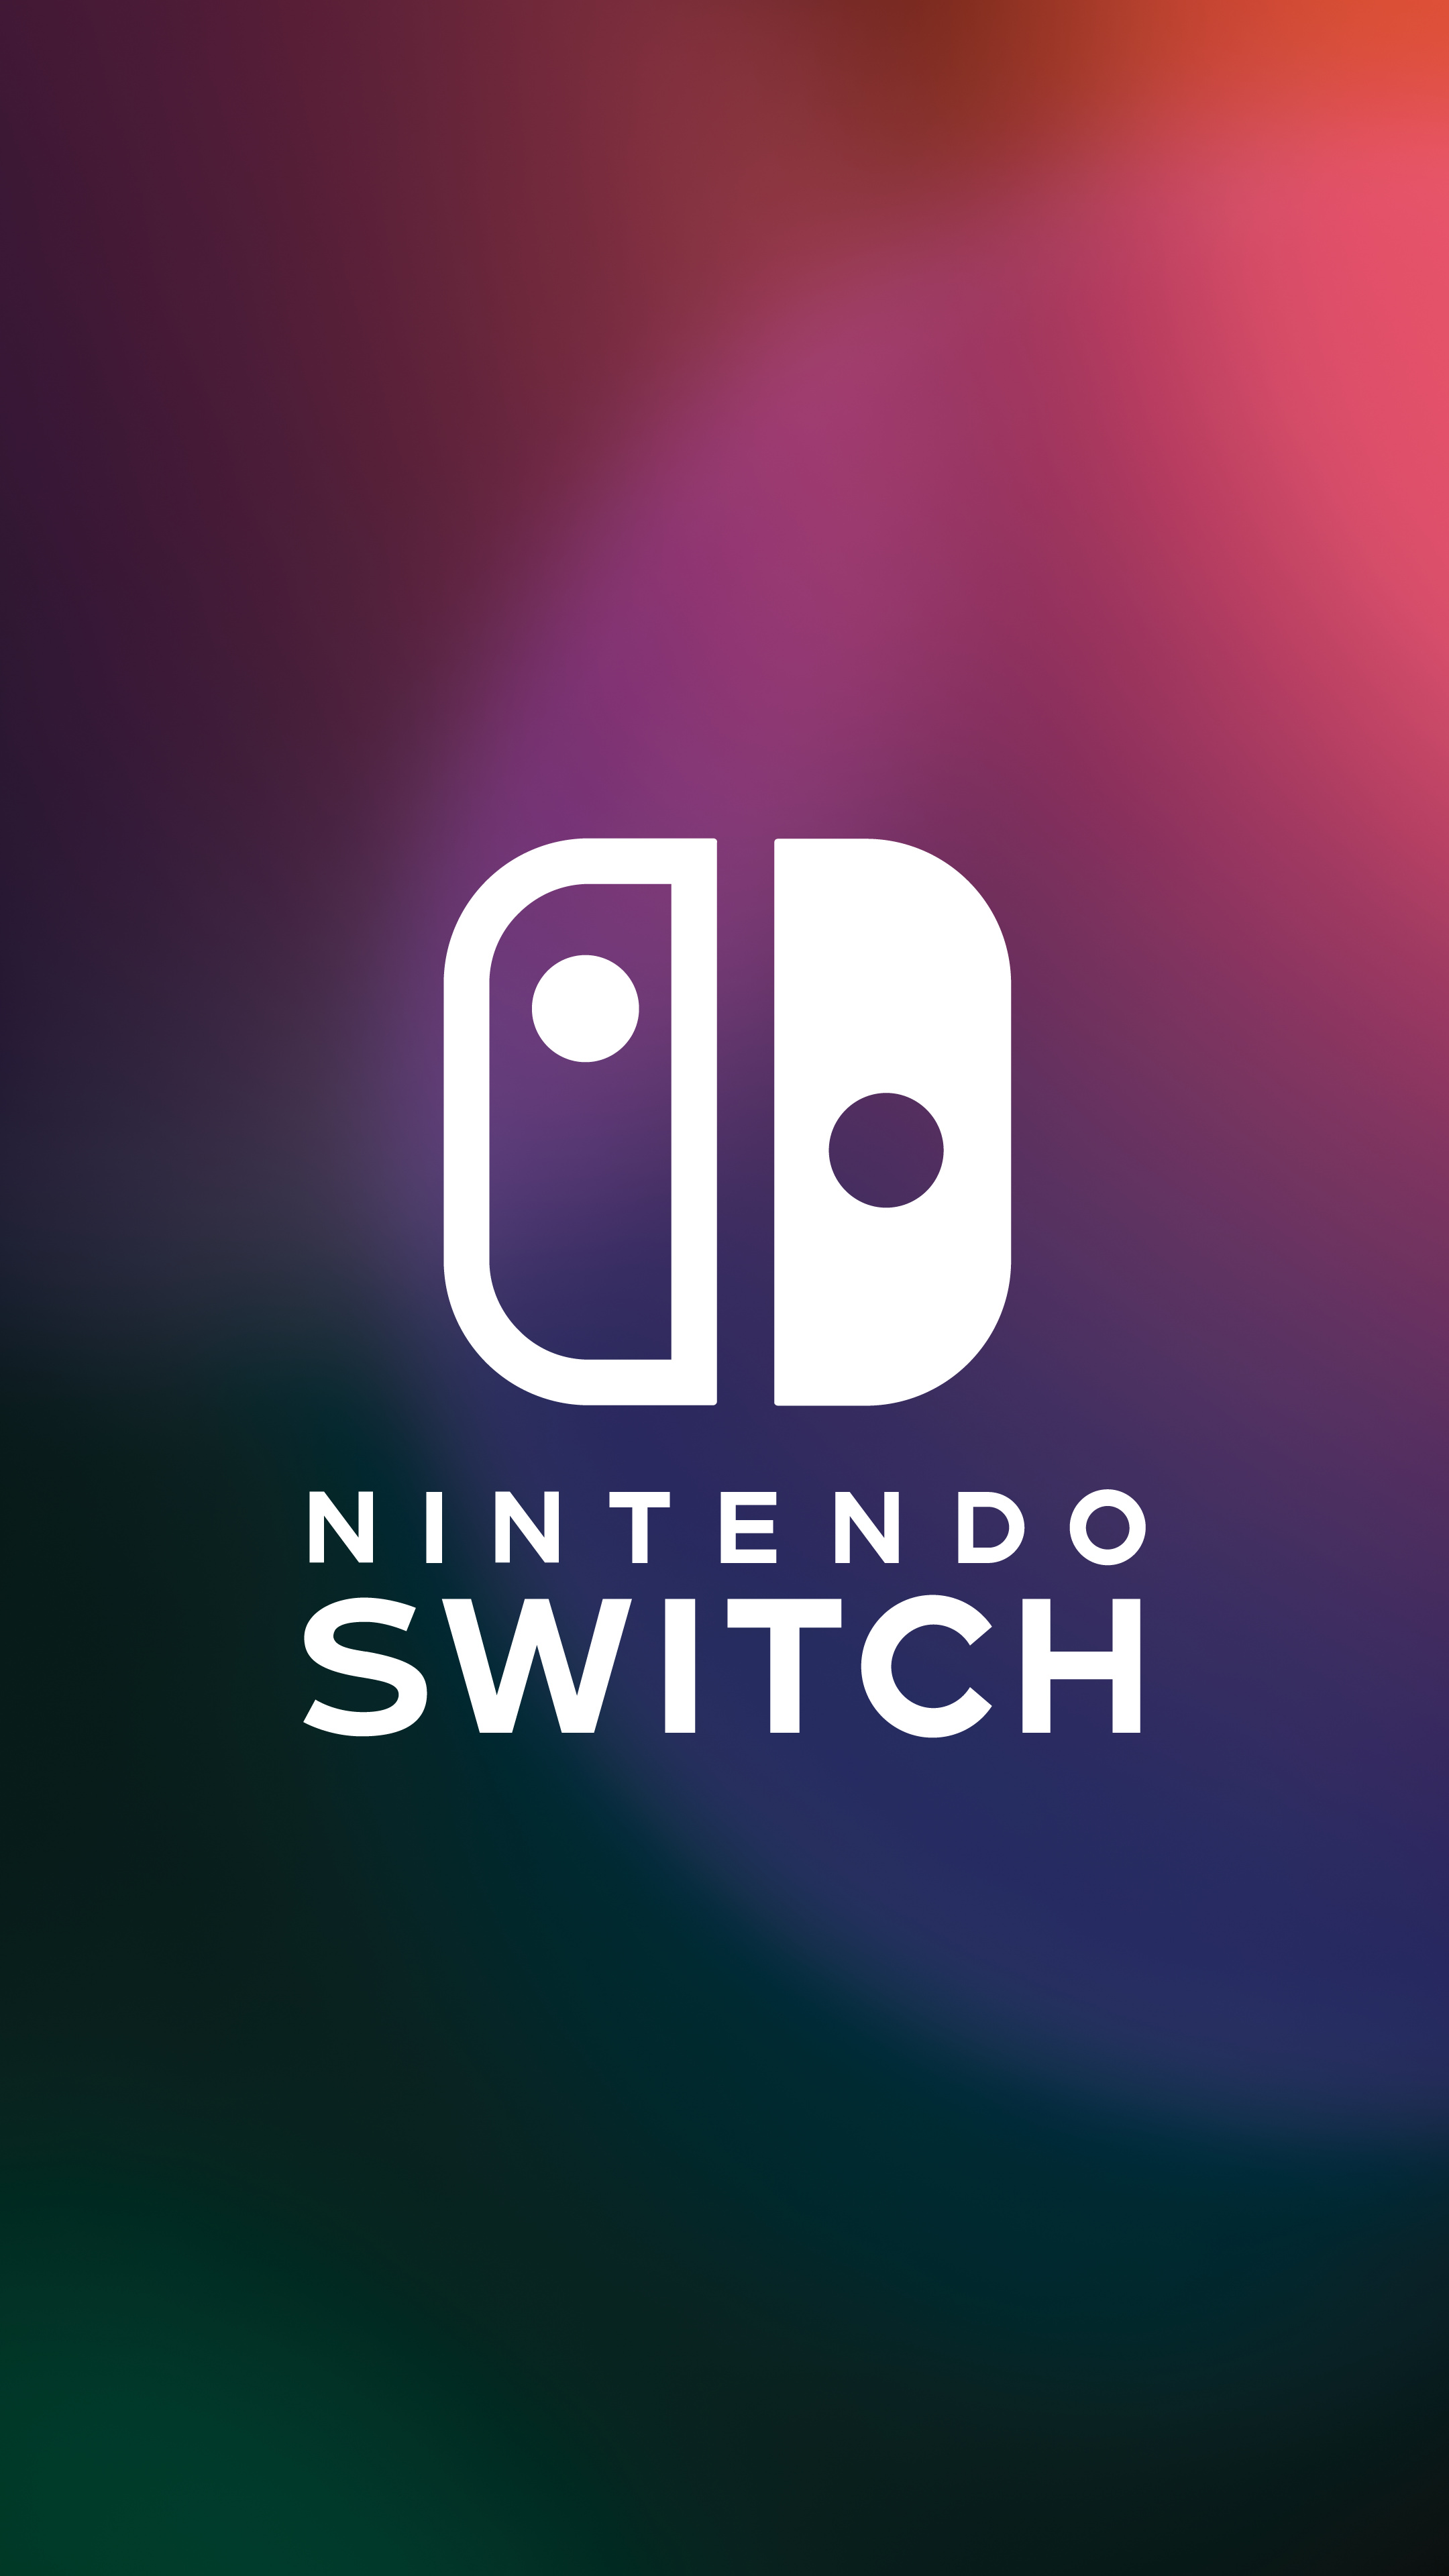 High-resolution Switch wallpapers, Mobile-friendly, Quality images, Customization options, 2160x3840 4K Phone